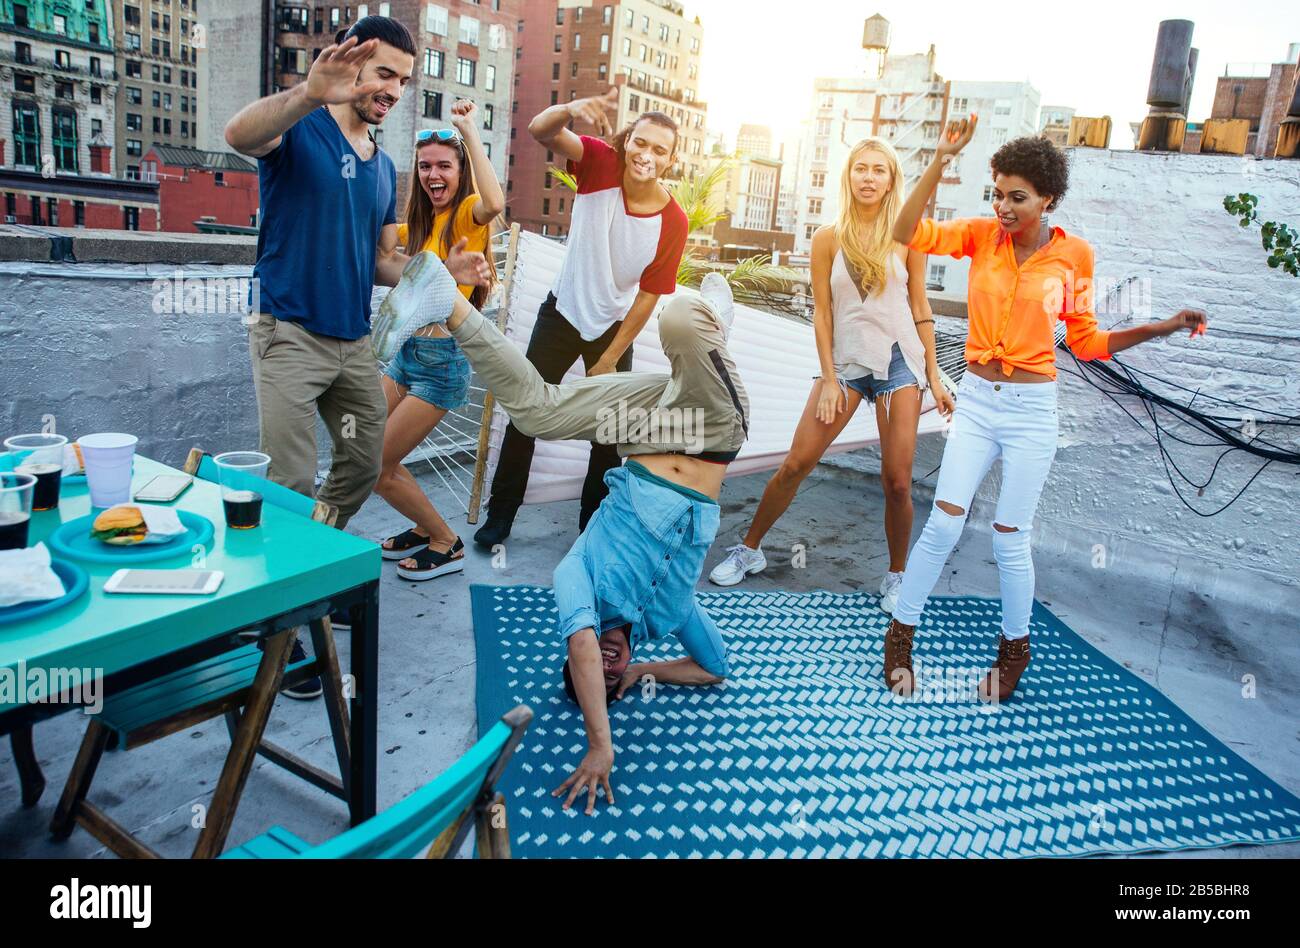 Group of friends spending time together on a rooftop in New york city, lifestyle concept with happy people Stock Photo